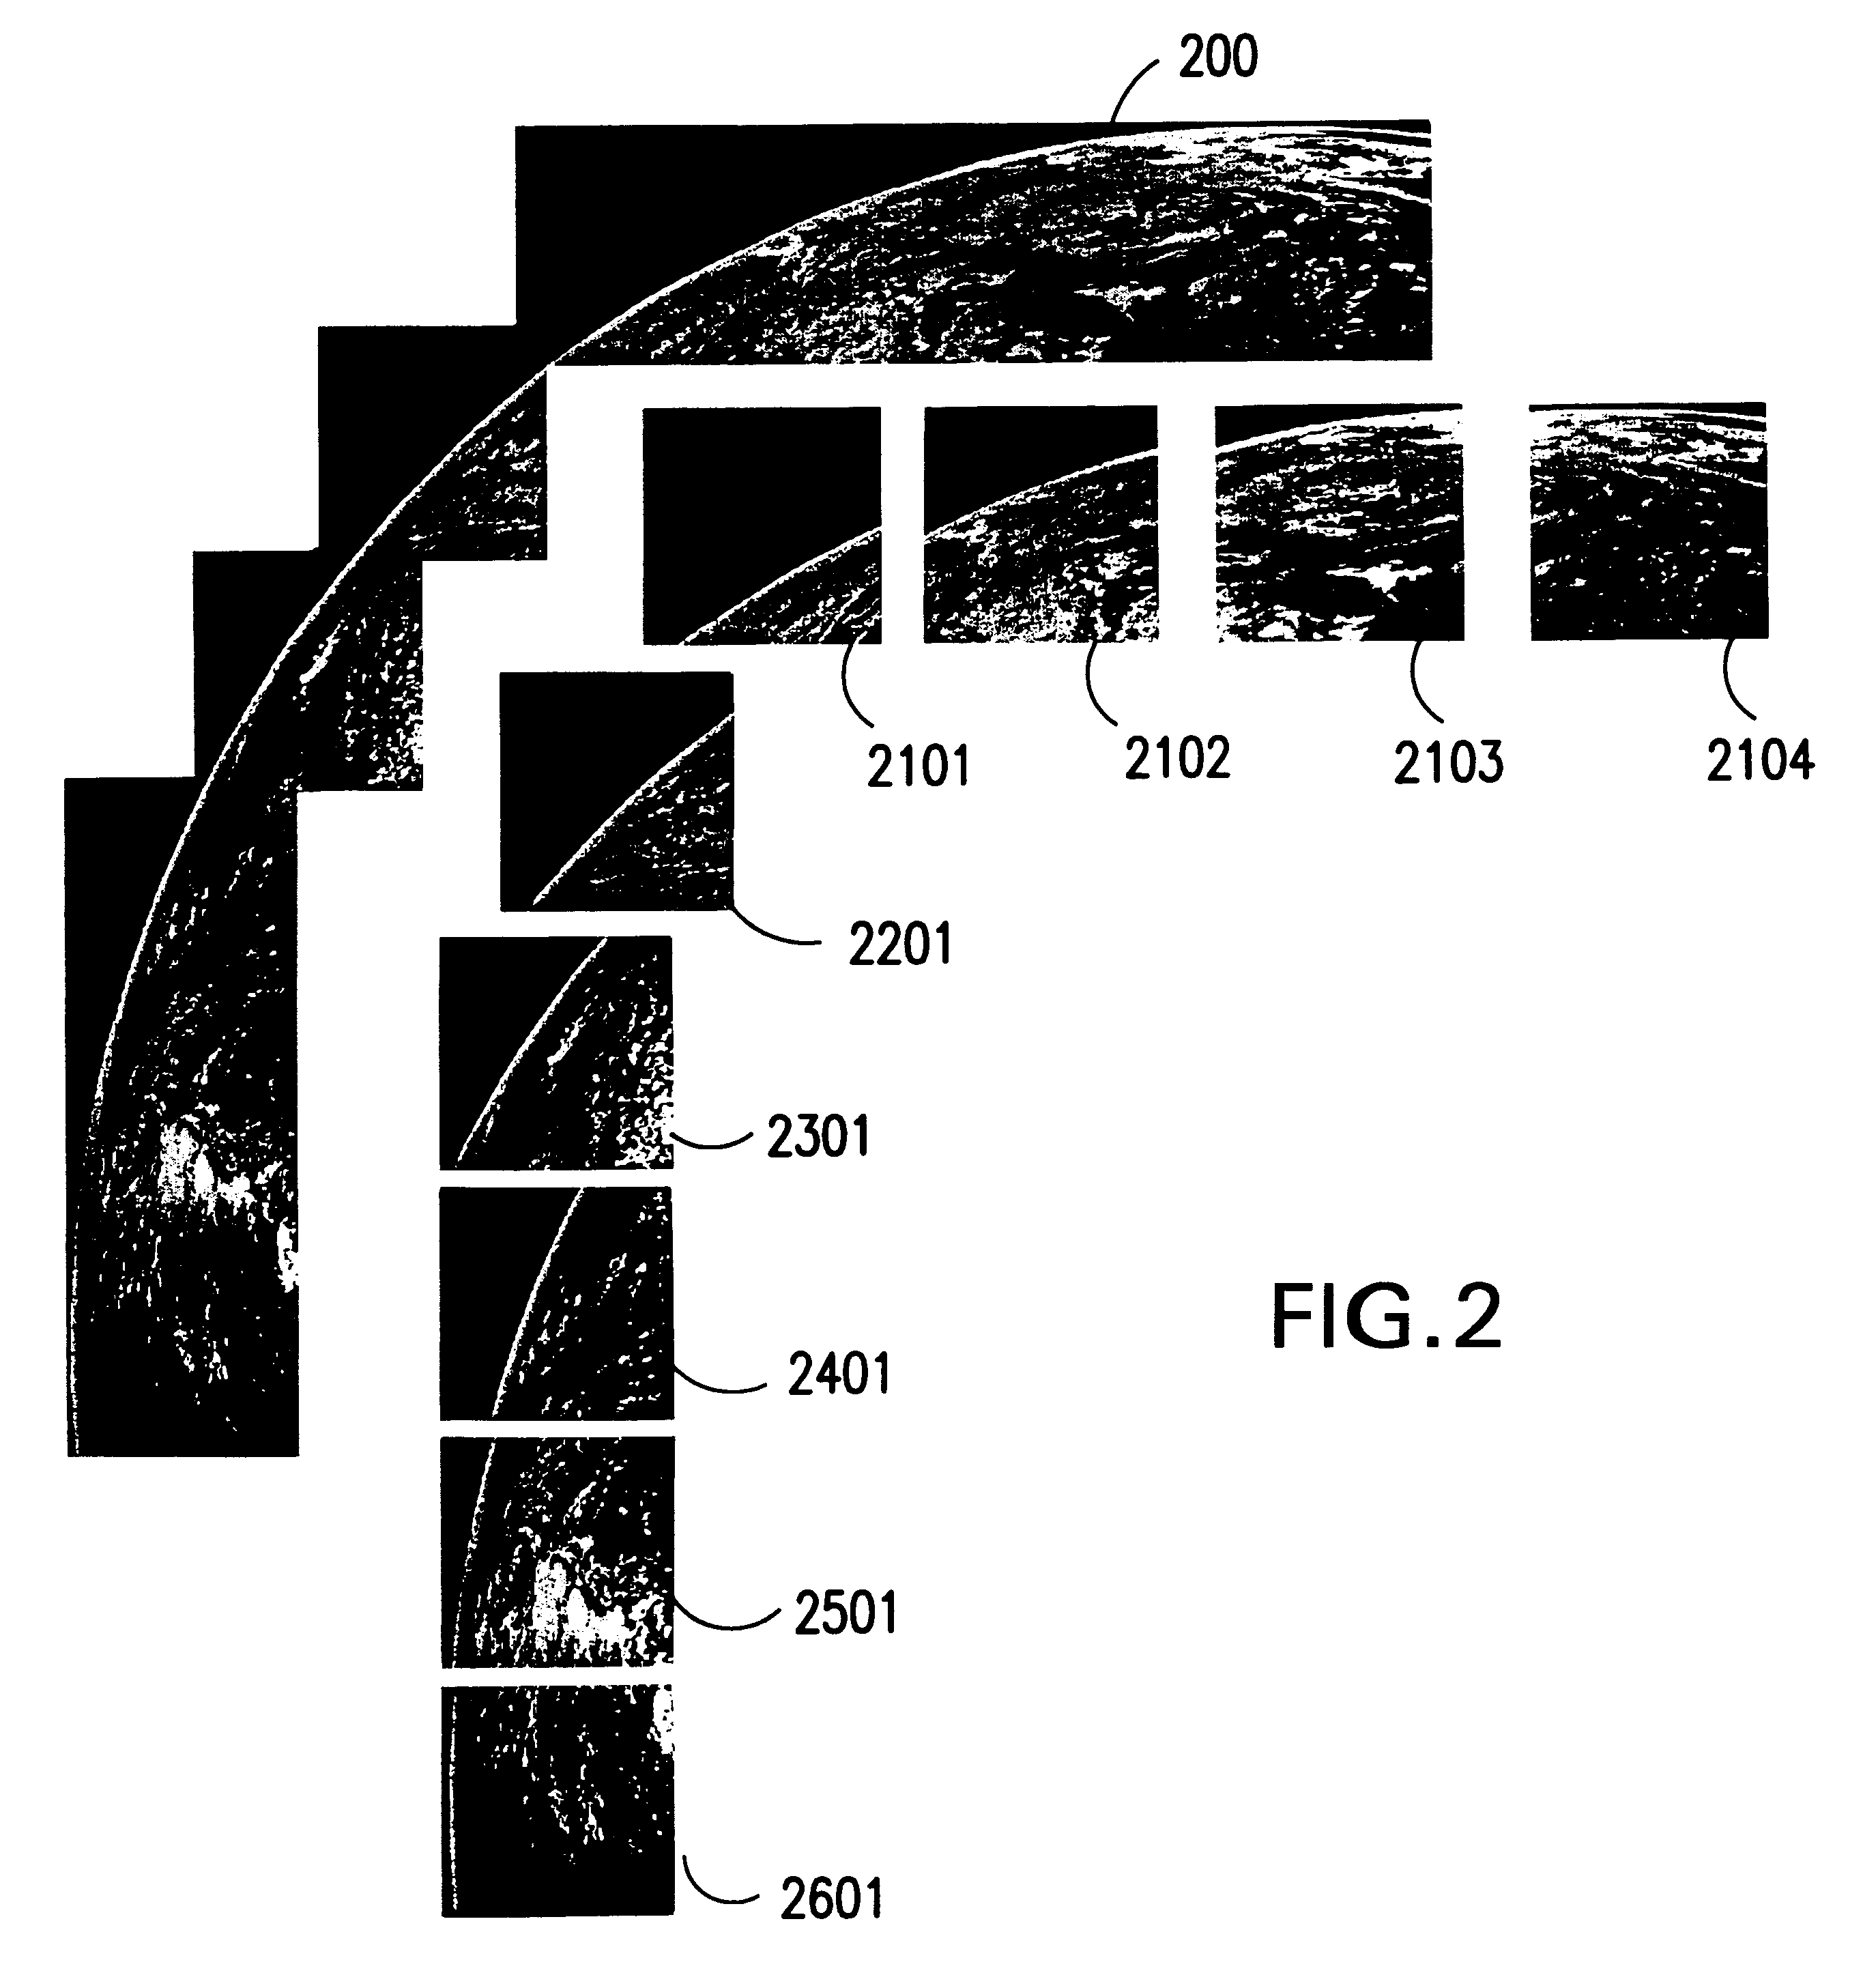 Direct broadcast imaging satellite system apparatus and method for providing real-time, continuous monitoring of Earth from geostationary Earth orbit